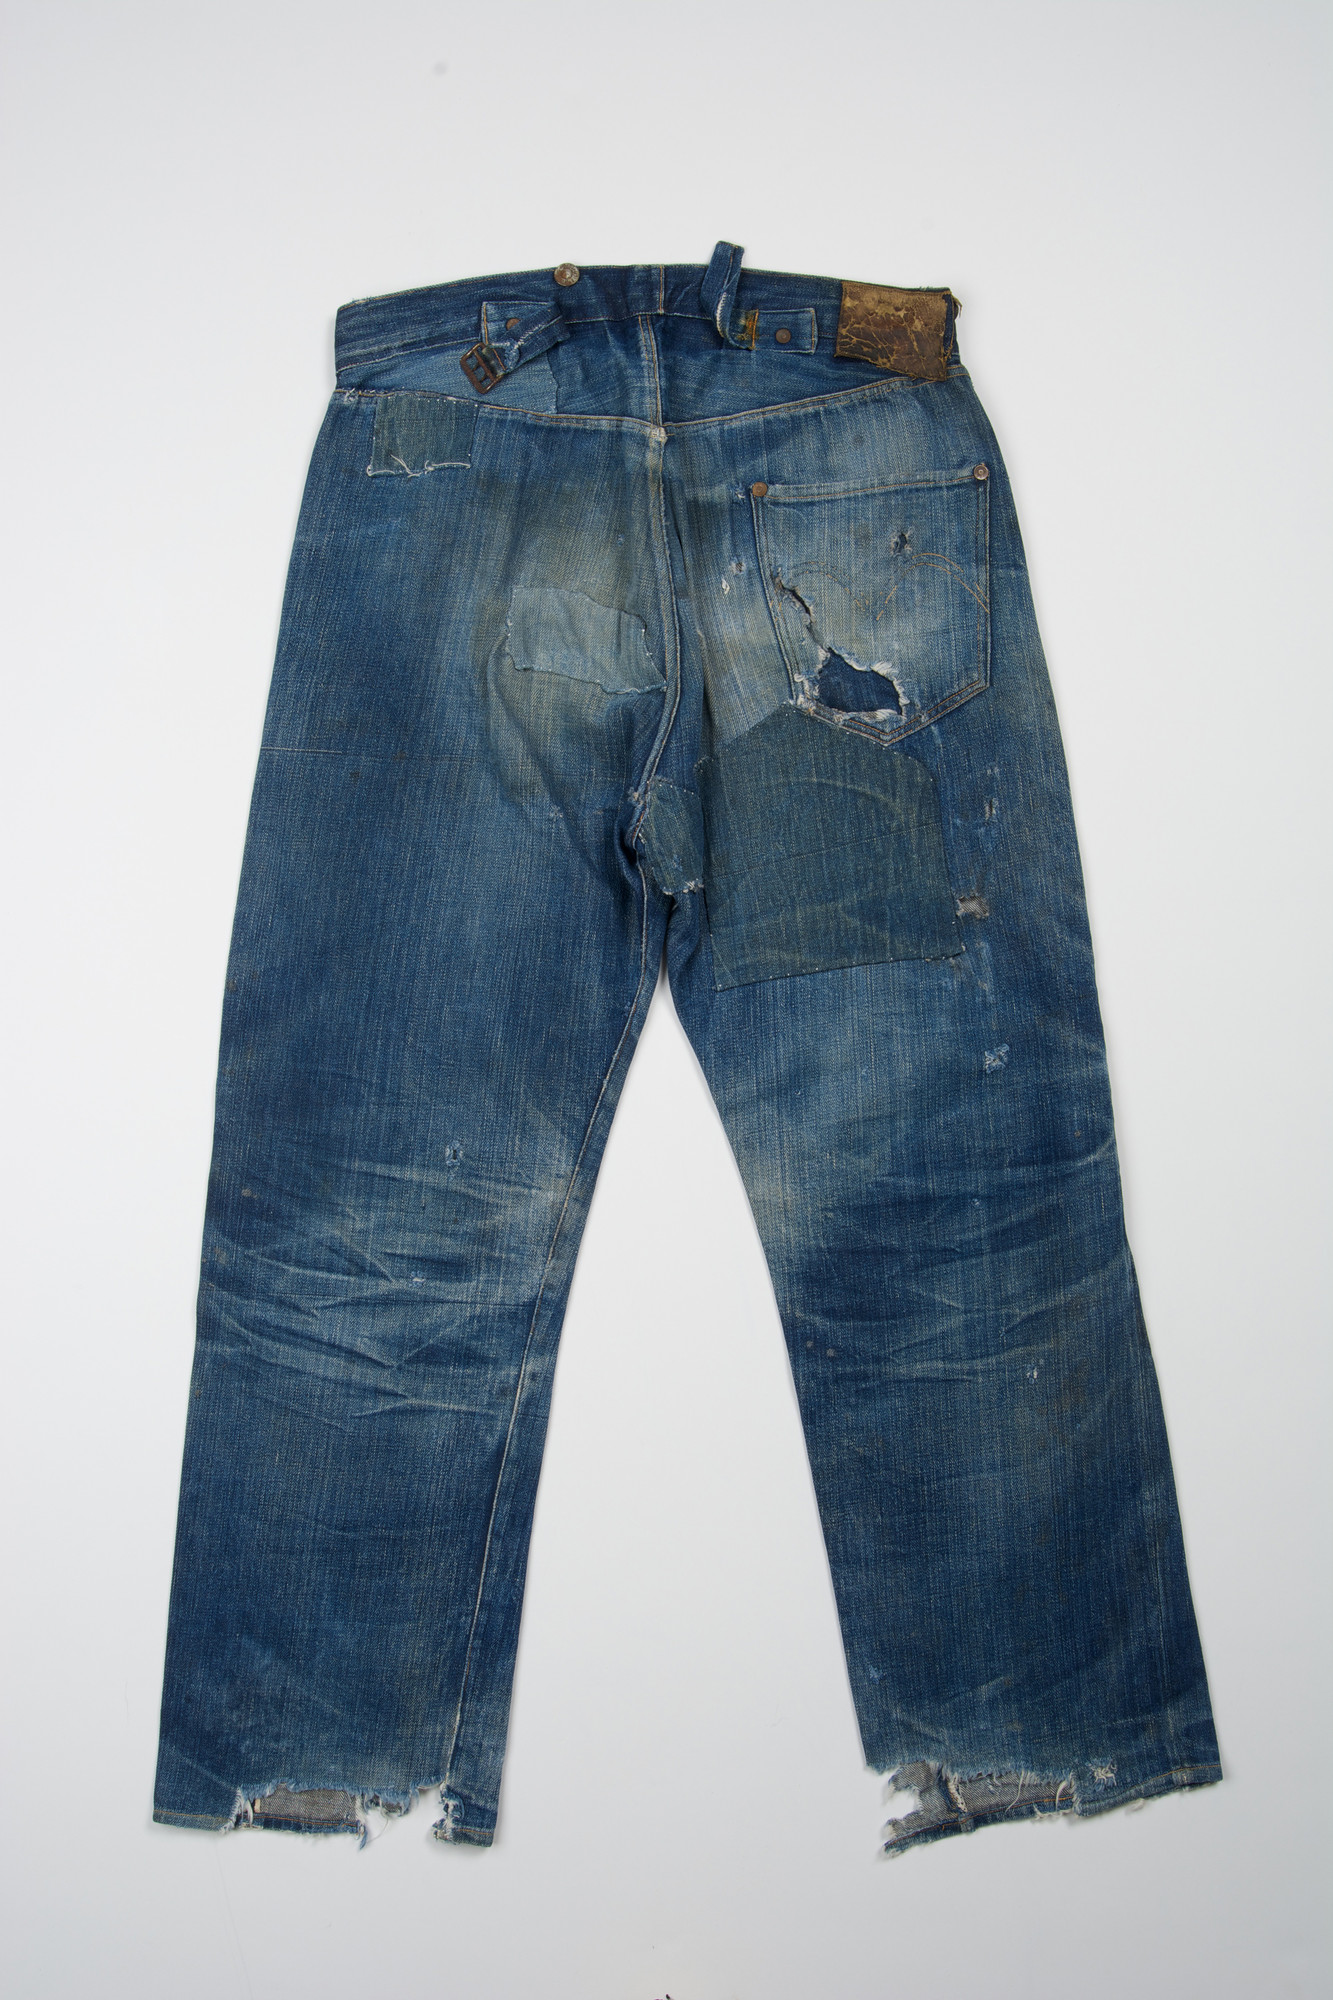 Levi Strauss & Co. Jeans. 1890 | MoMA